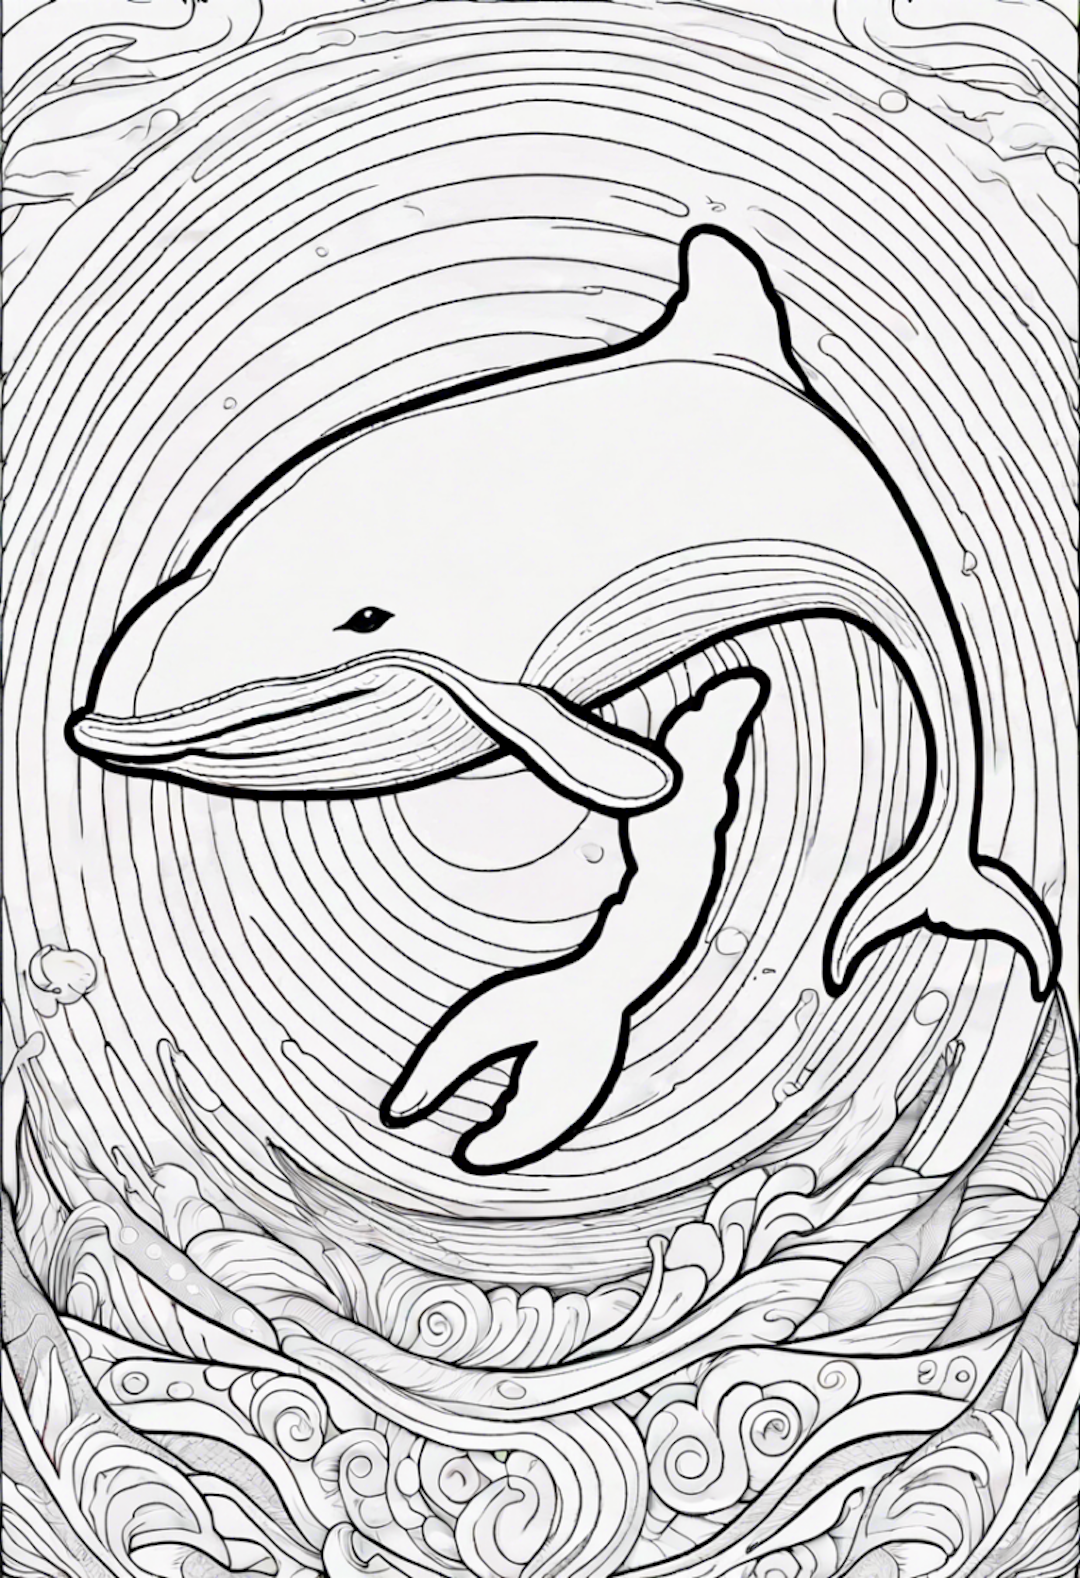 Whale’s Ocean Dance Coloring Page coloring pages